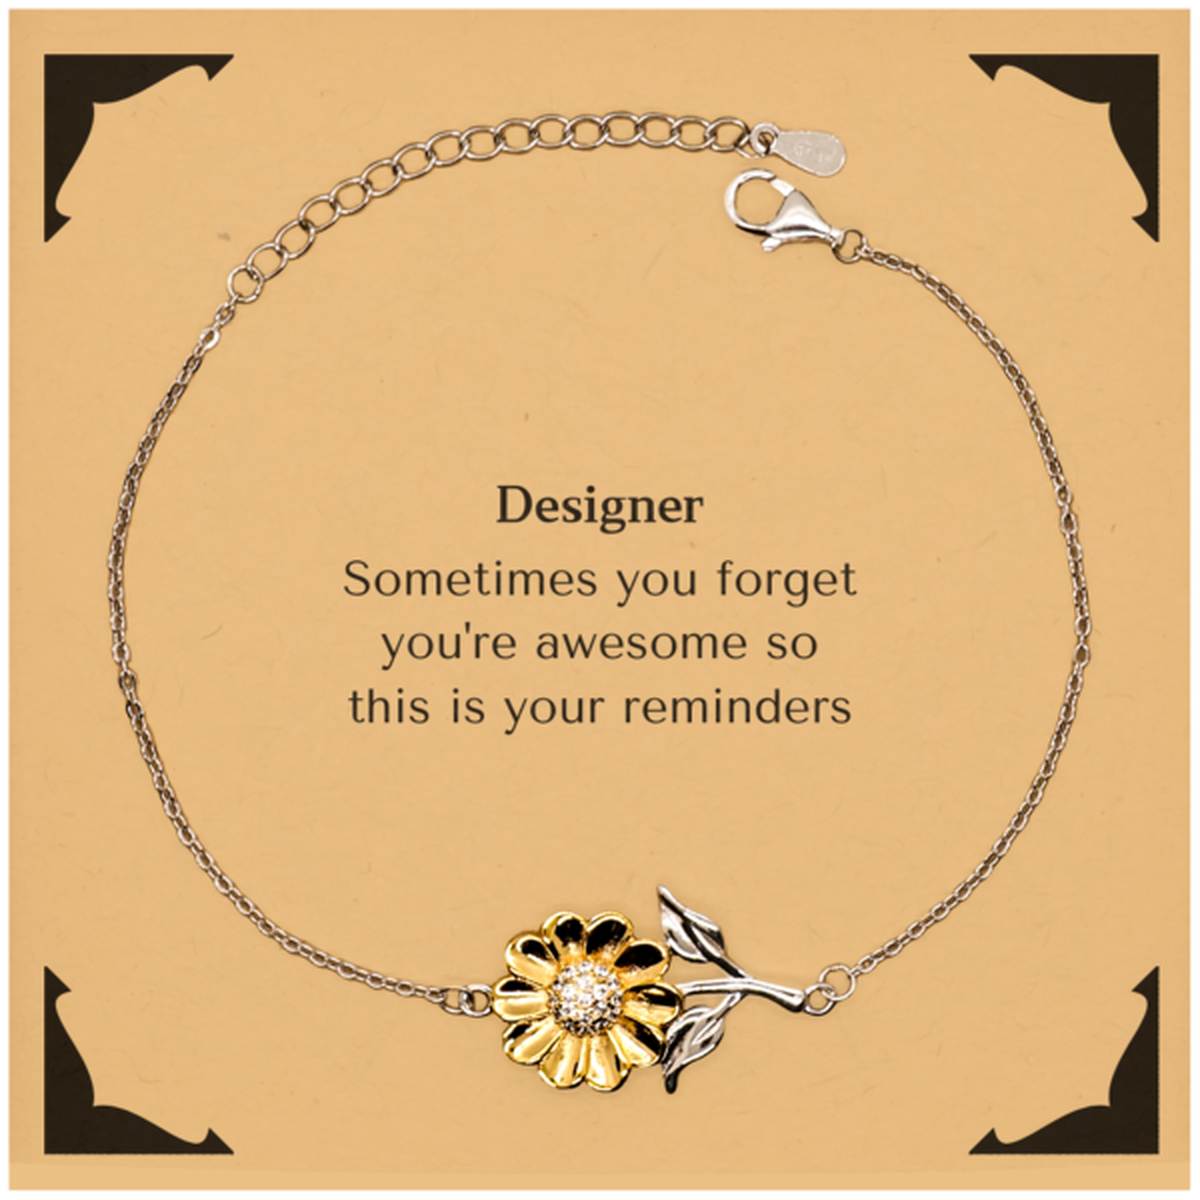 Sentimental Designer Sunflower Bracelet, Designer Sometimes you forget you're awesome so this is your reminders, Graduation Christmas Birthday Gifts for Designer, Men, Women, Coworkers